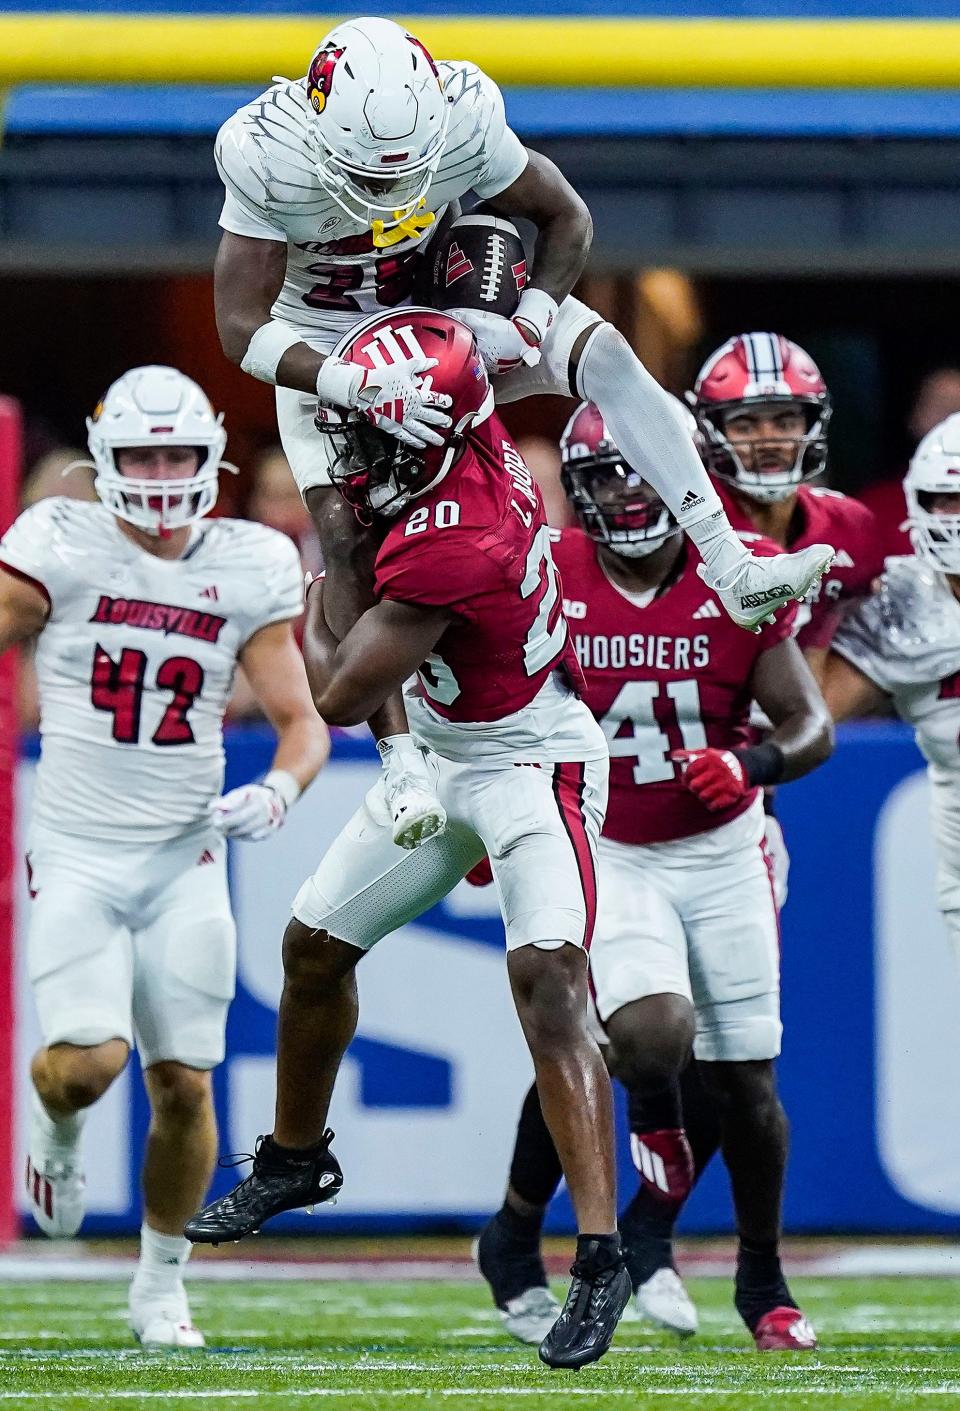 Louisville Cardinals running back Jawhar Jordan (25) leaps over Indiana Hoosiers defensive back Louis Moore (20) on Saturday, Sept. 16, 2023, during the game at Lucas Oil Stadium in Indianapolis. The Louisville Cardinals defeated the Indiana Hoosiers, 21-14.